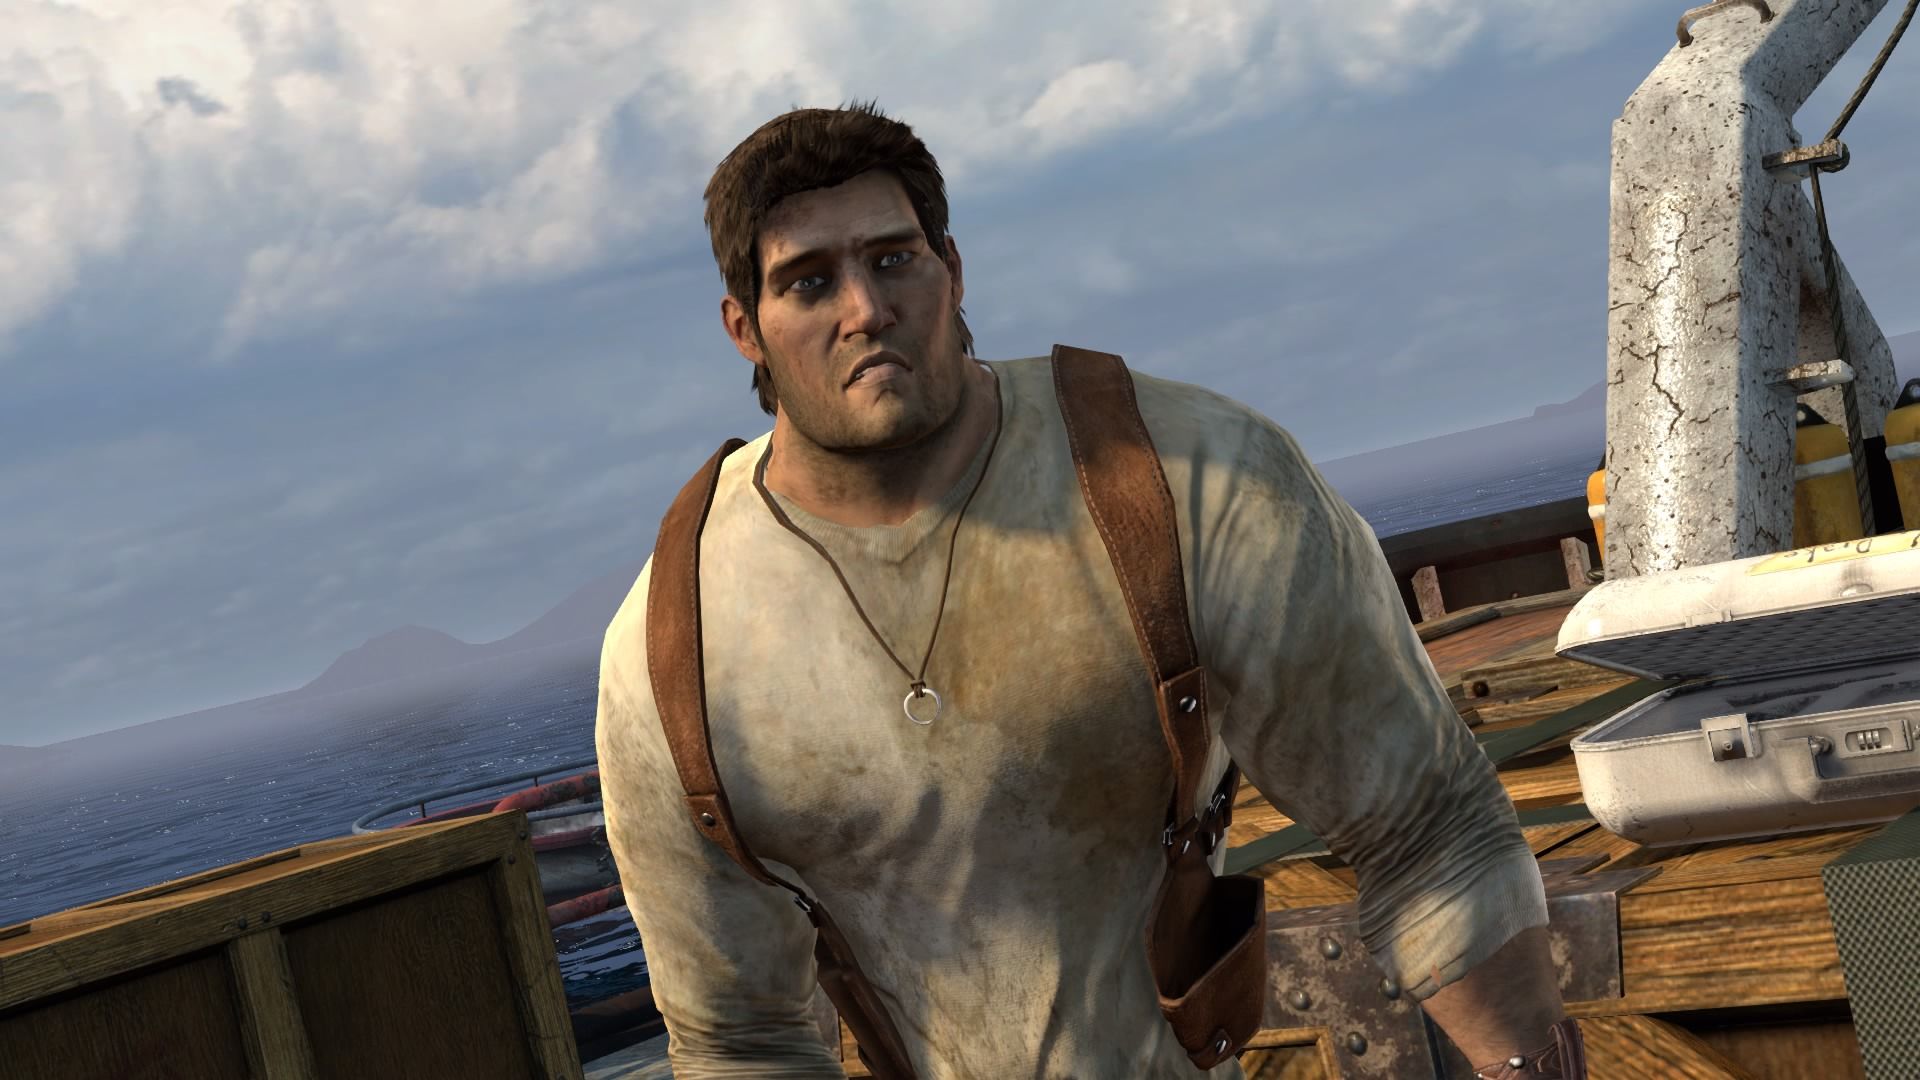 uncharted 1 pc download